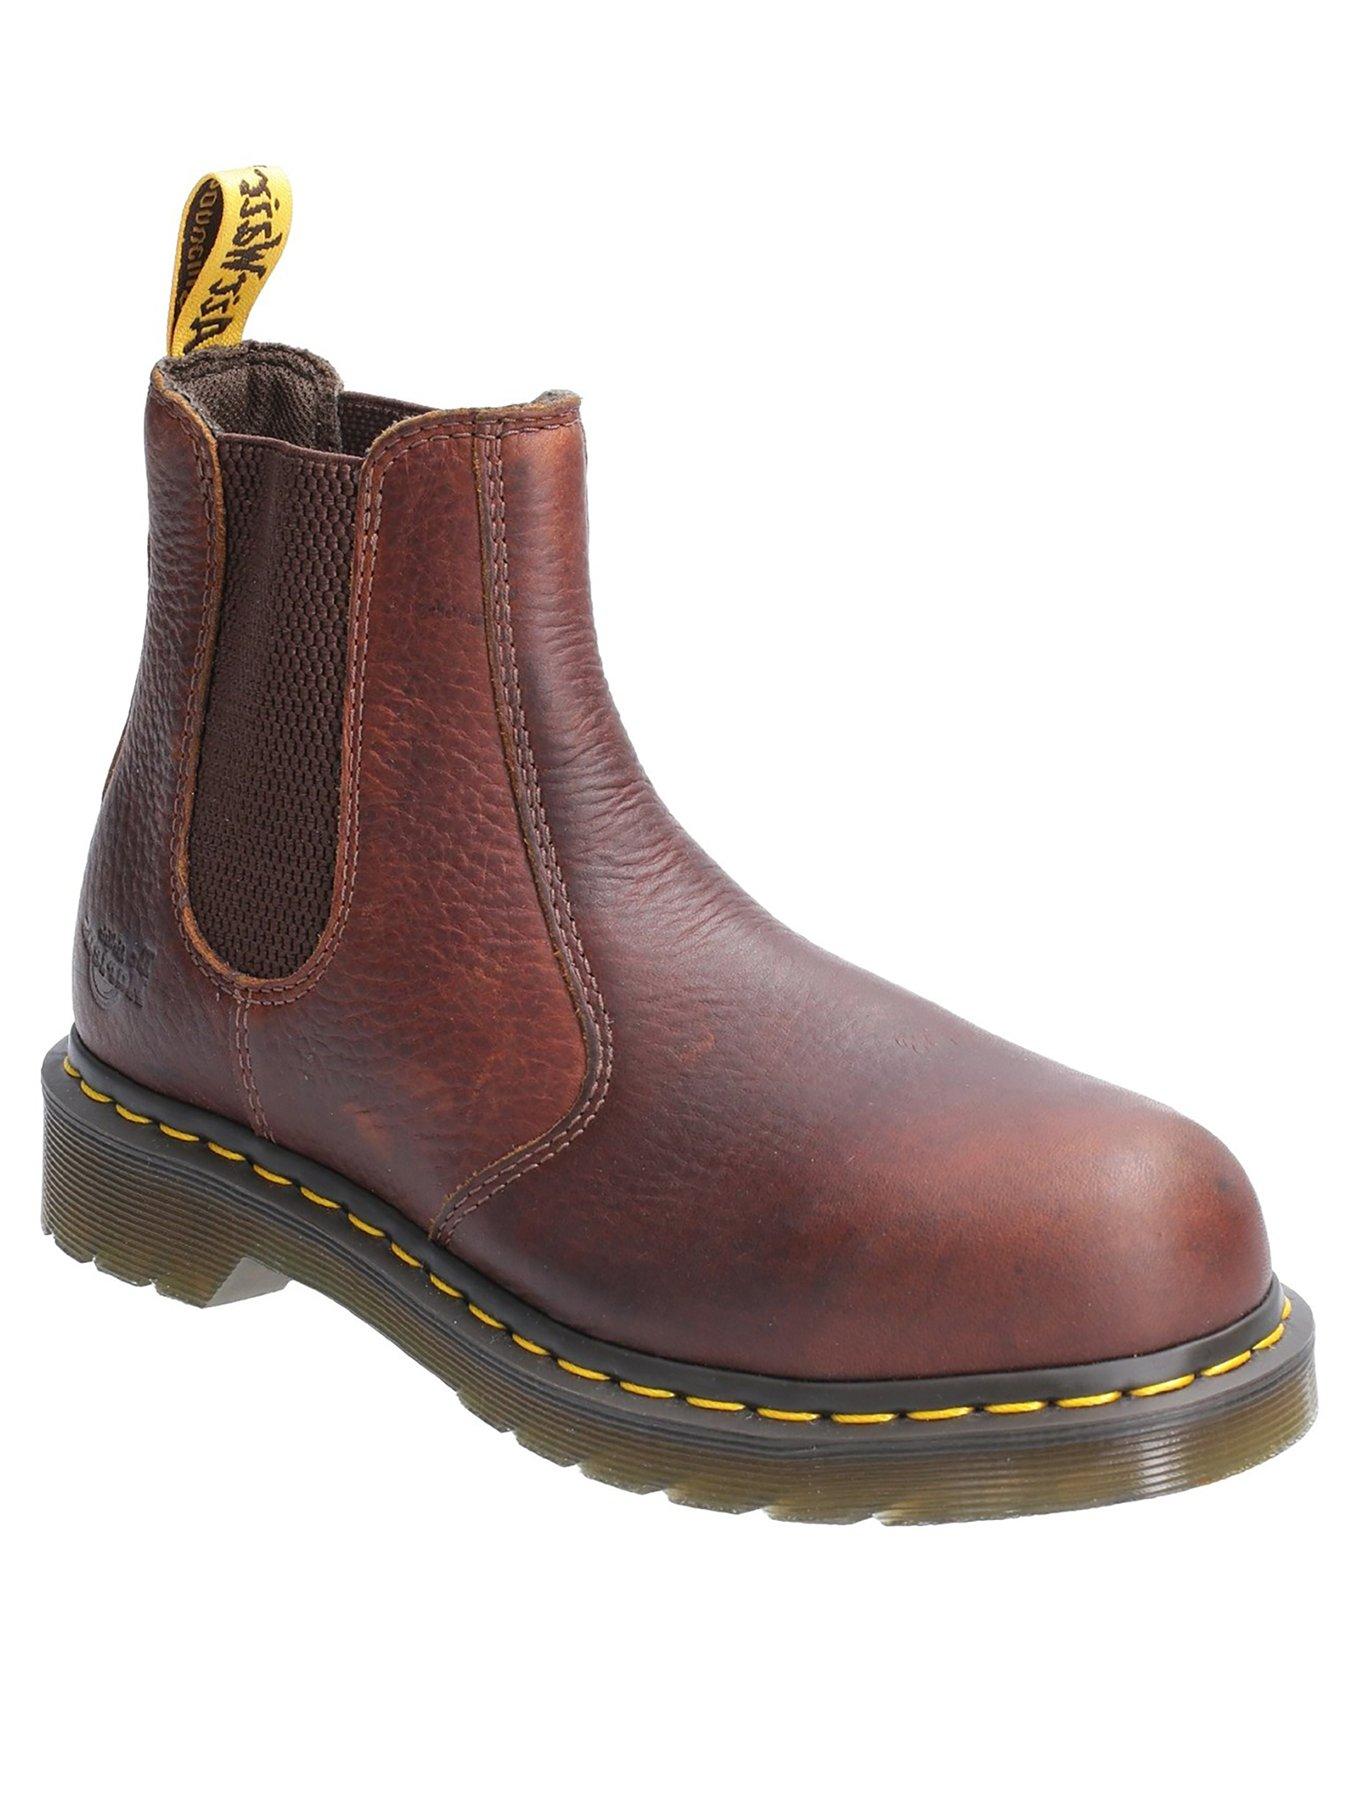 dr martens safety boots ireland